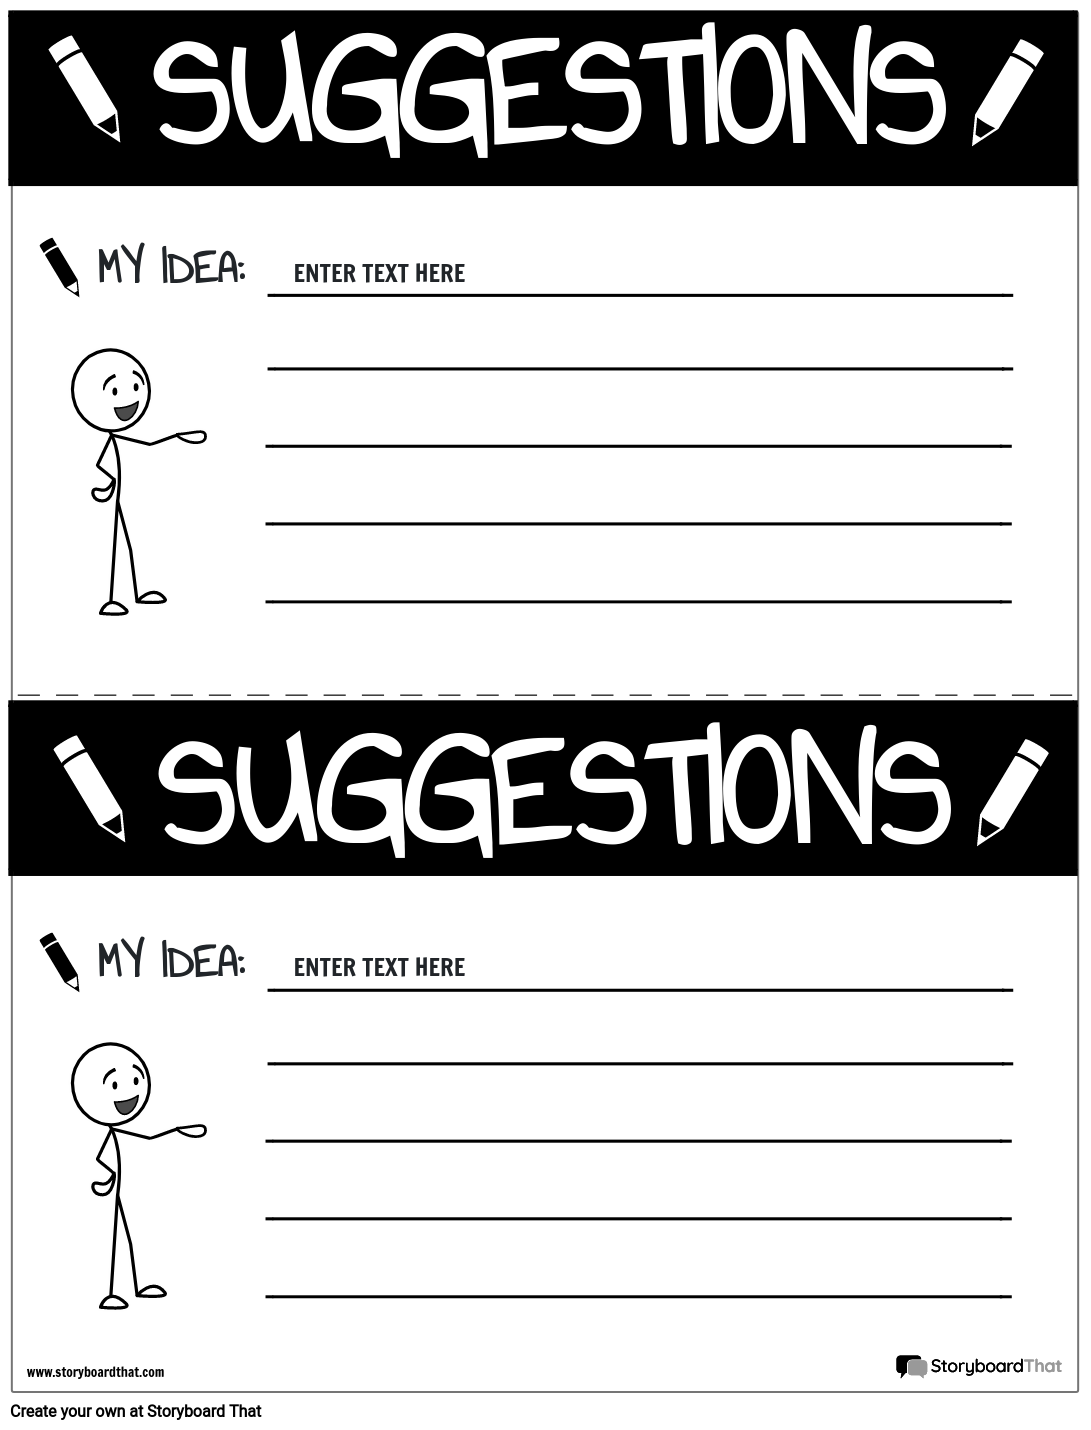 Suggestion Slip 4 Storyboard by worksheet templates